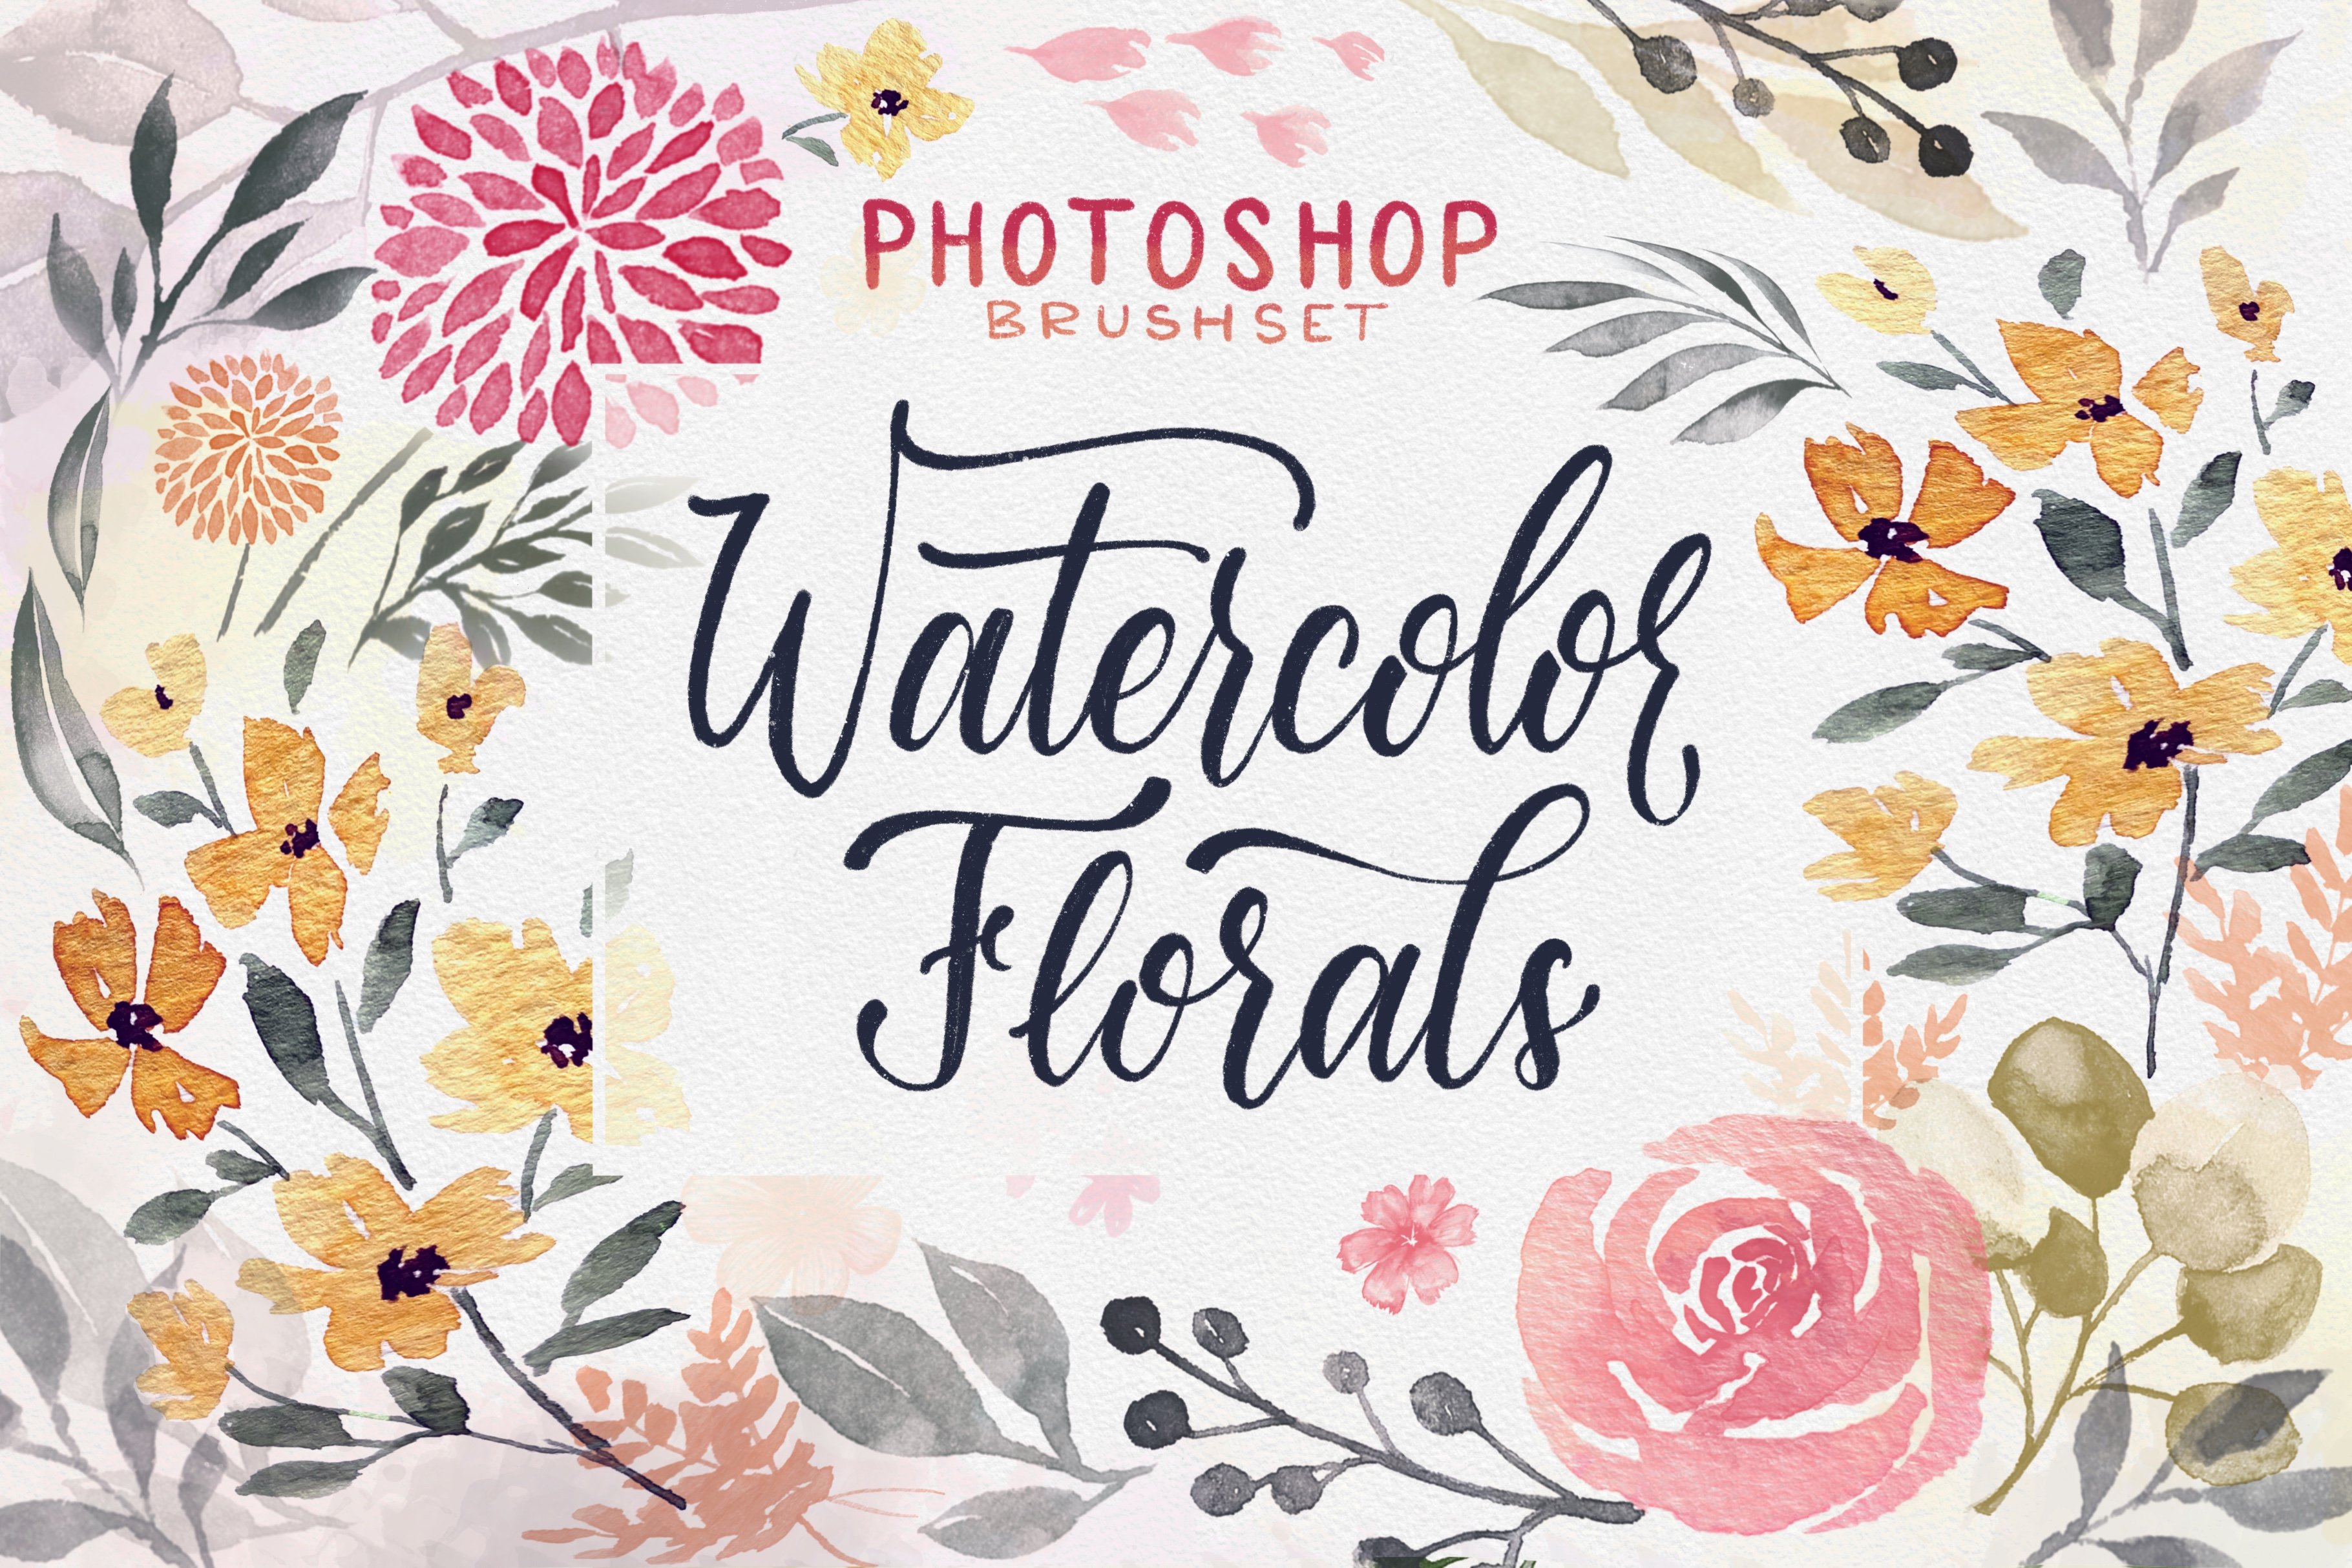 Watercolor Florals for Photoshopcover image.